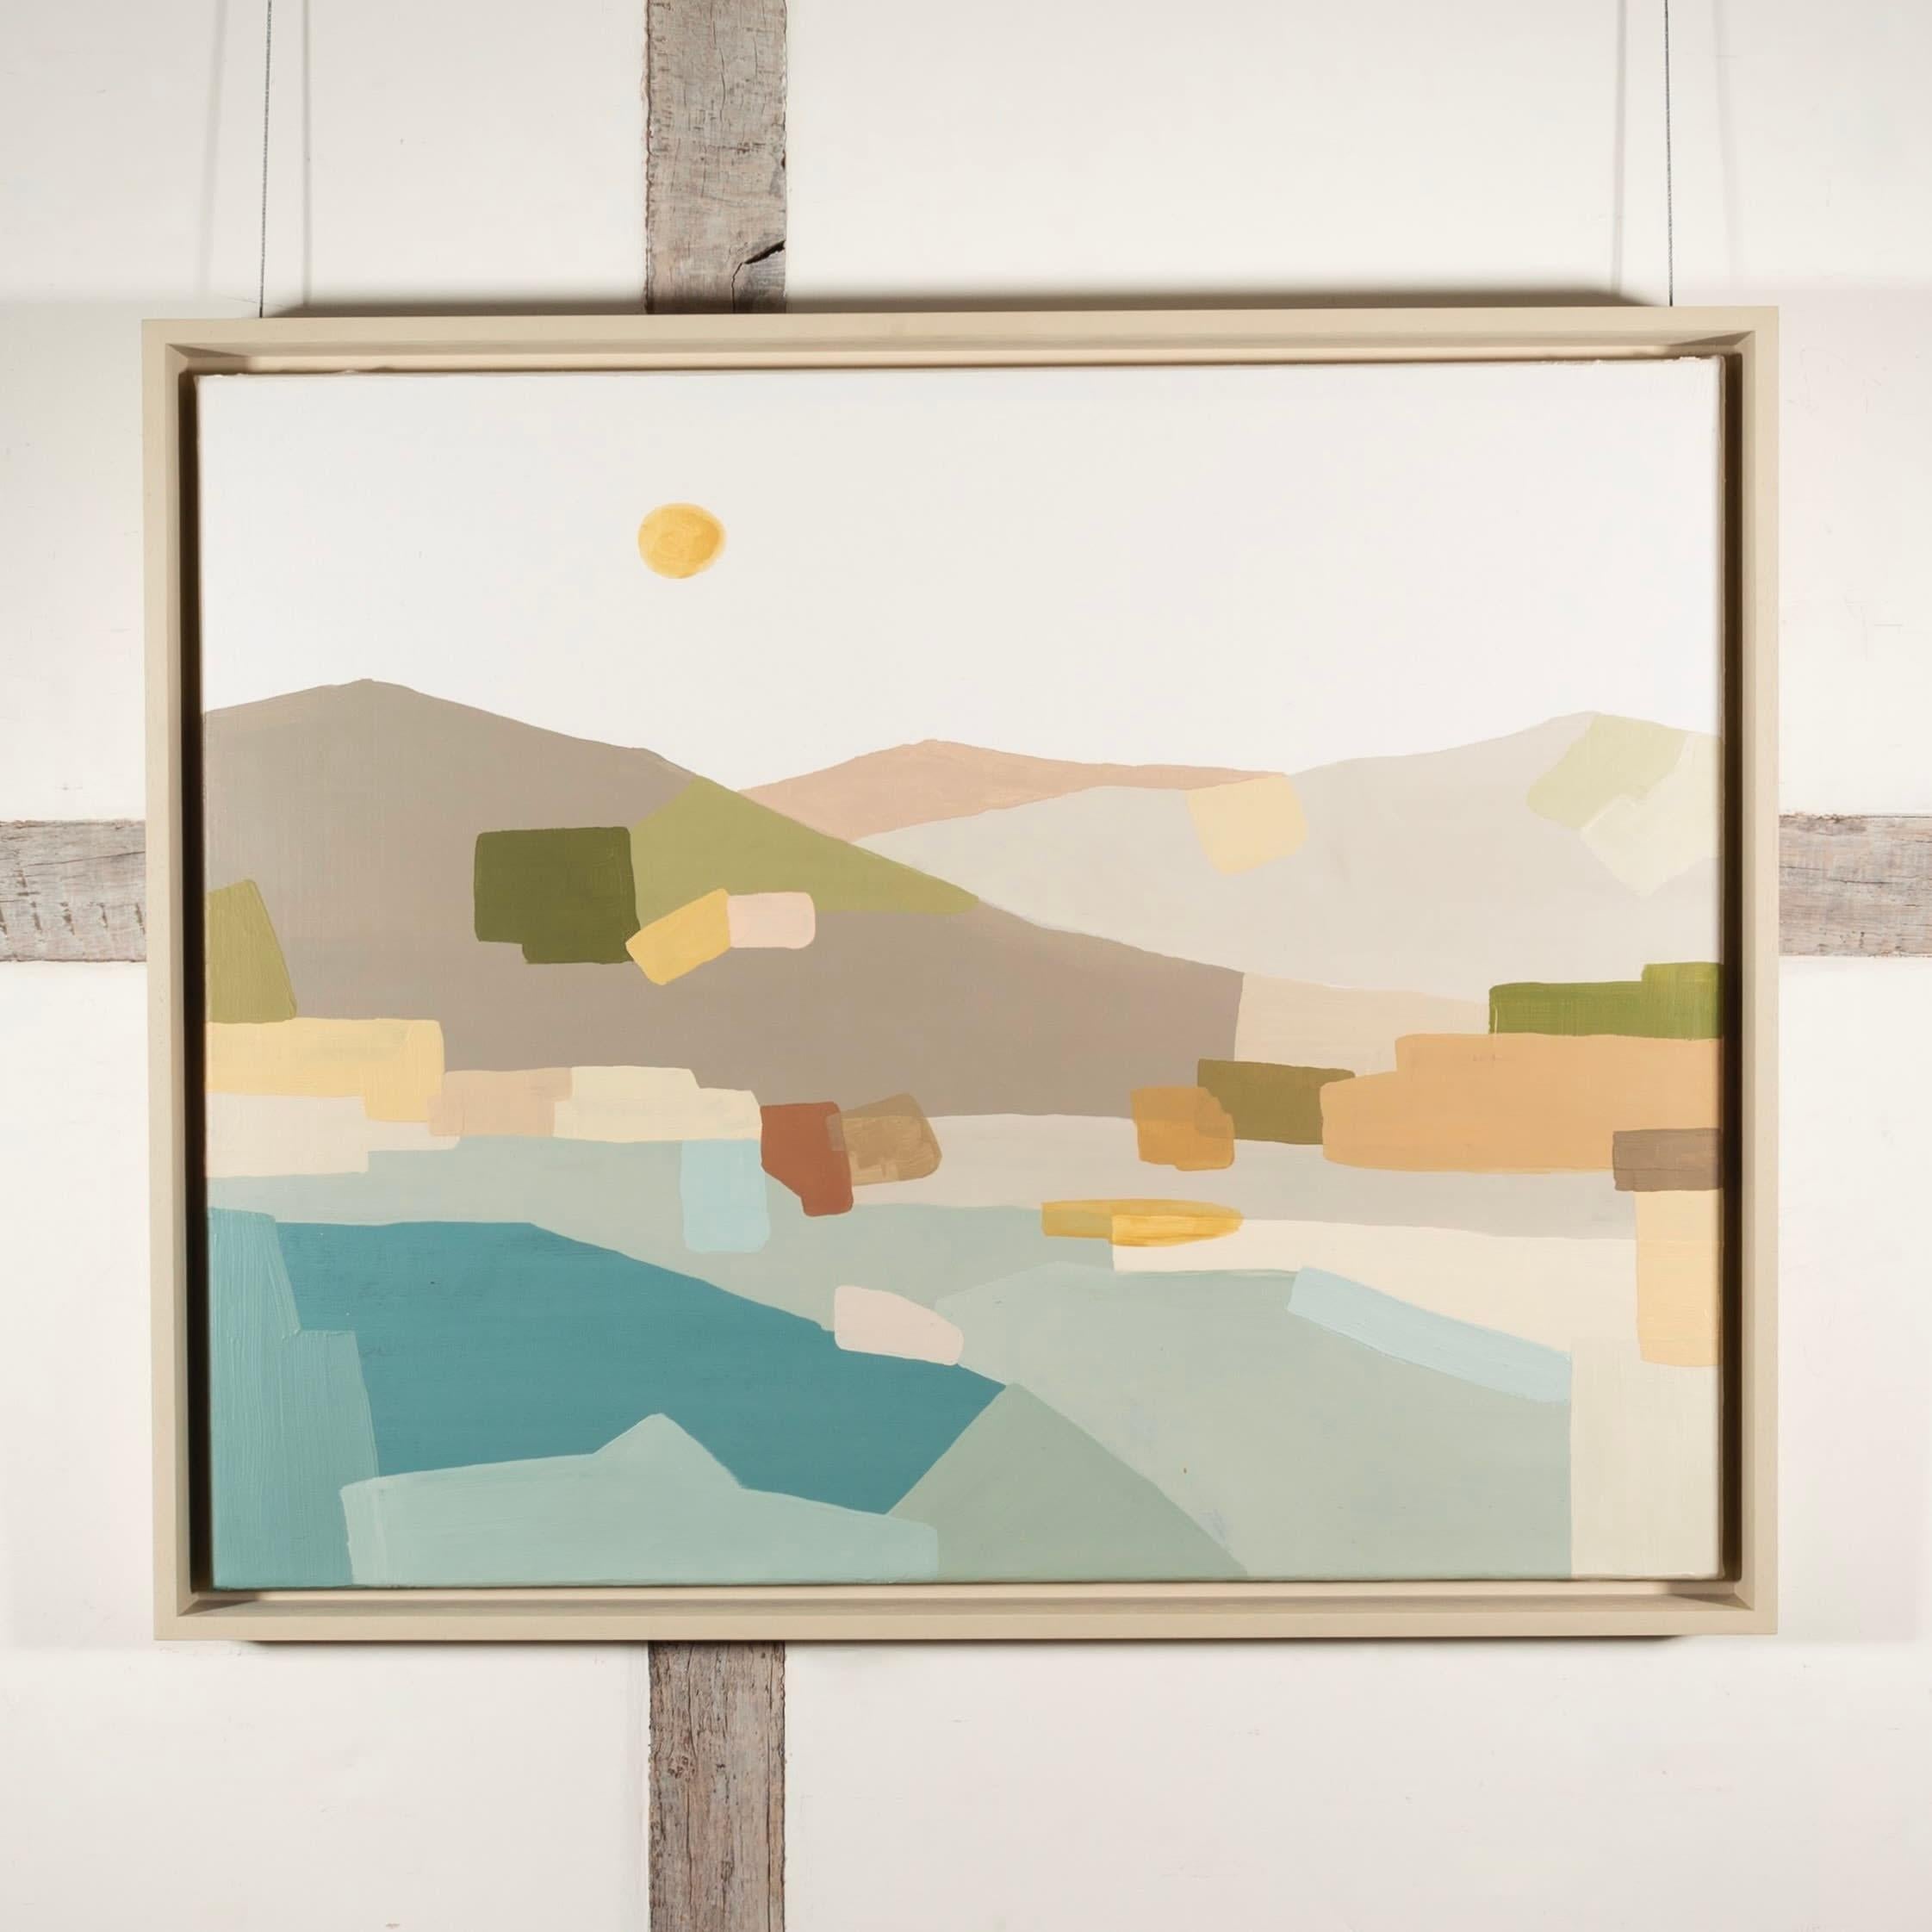 Sunset Over Pollensa, Acrylic on Canvas Painting by Rosa Roig-Fiol B. 1991, 2023

Additional information:
Medium: Acrylic and plaster on canvas
Dimensions: 61 x 76.2 cm
24 x 30 in
Signed, titled and dated verso

Rosa Roig-Fiol is a Spanish-British